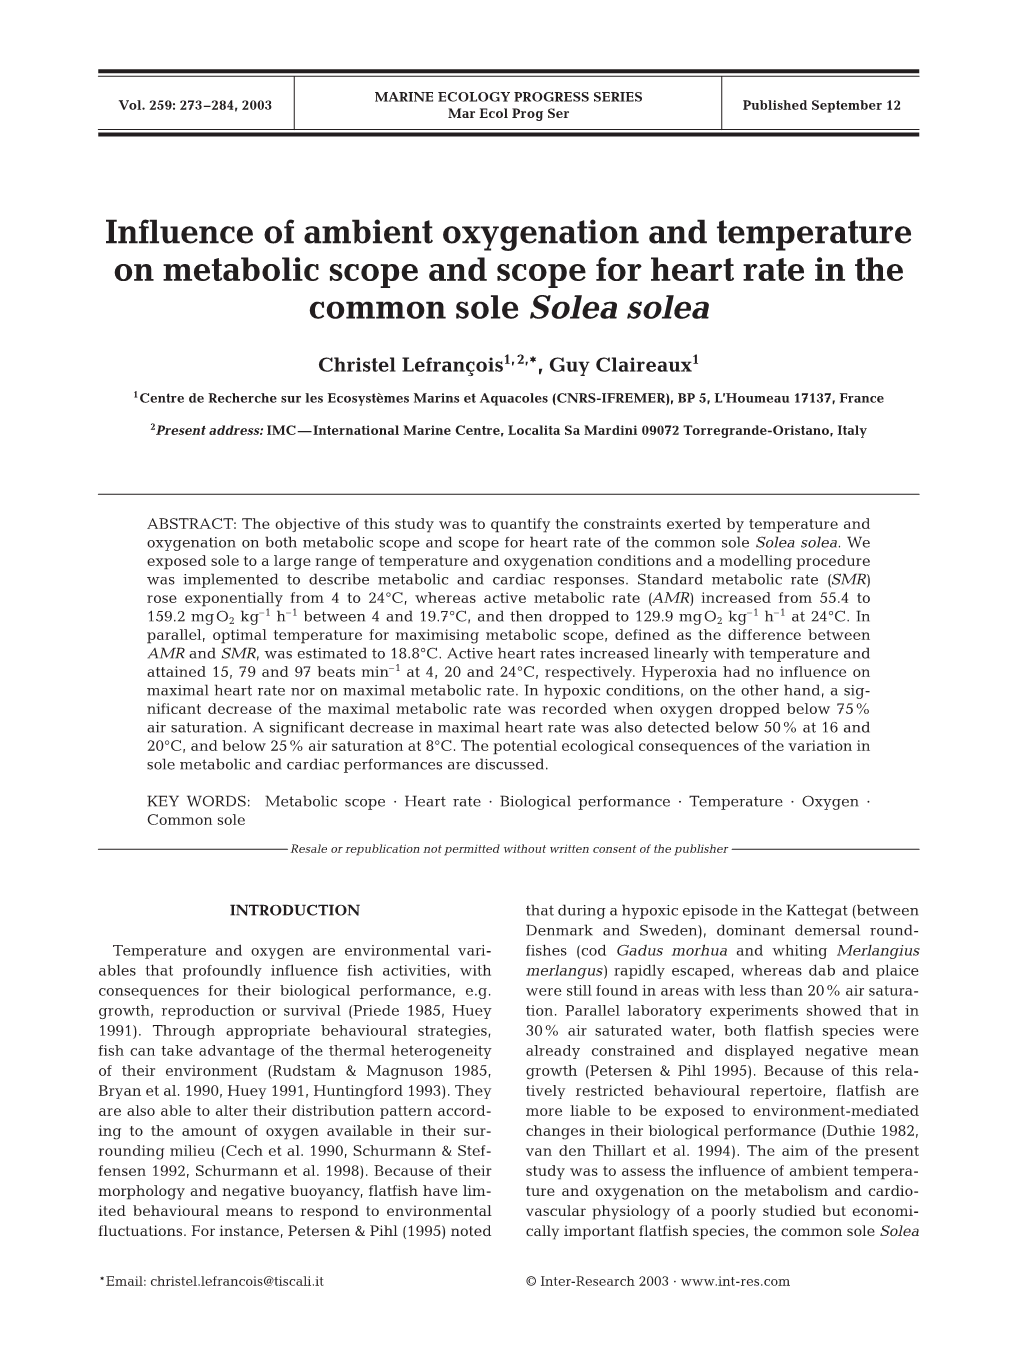 Influence of Ambient Oxygenation and Temperature on Metabolic Scope and Scope for Heart Rate in the Common Sole Solea Solea